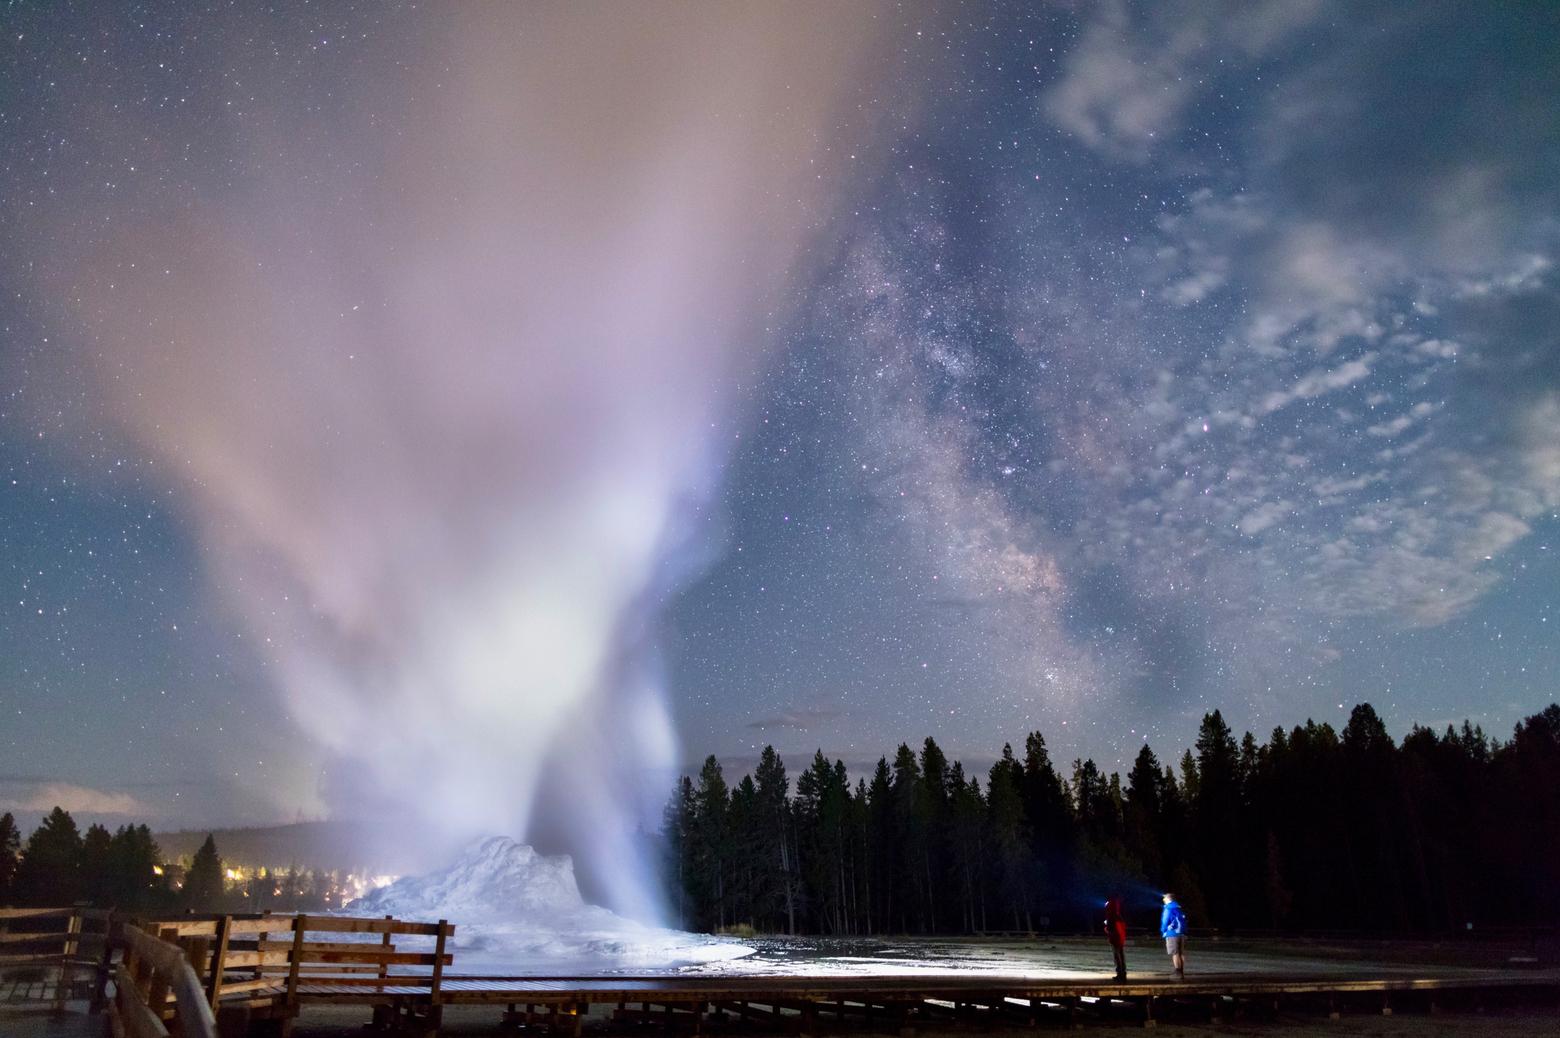 A father and son share a nighttime eruption of Castle Geyser in Yellowstone. Photo courtesy Jacob W. Frank/NPS